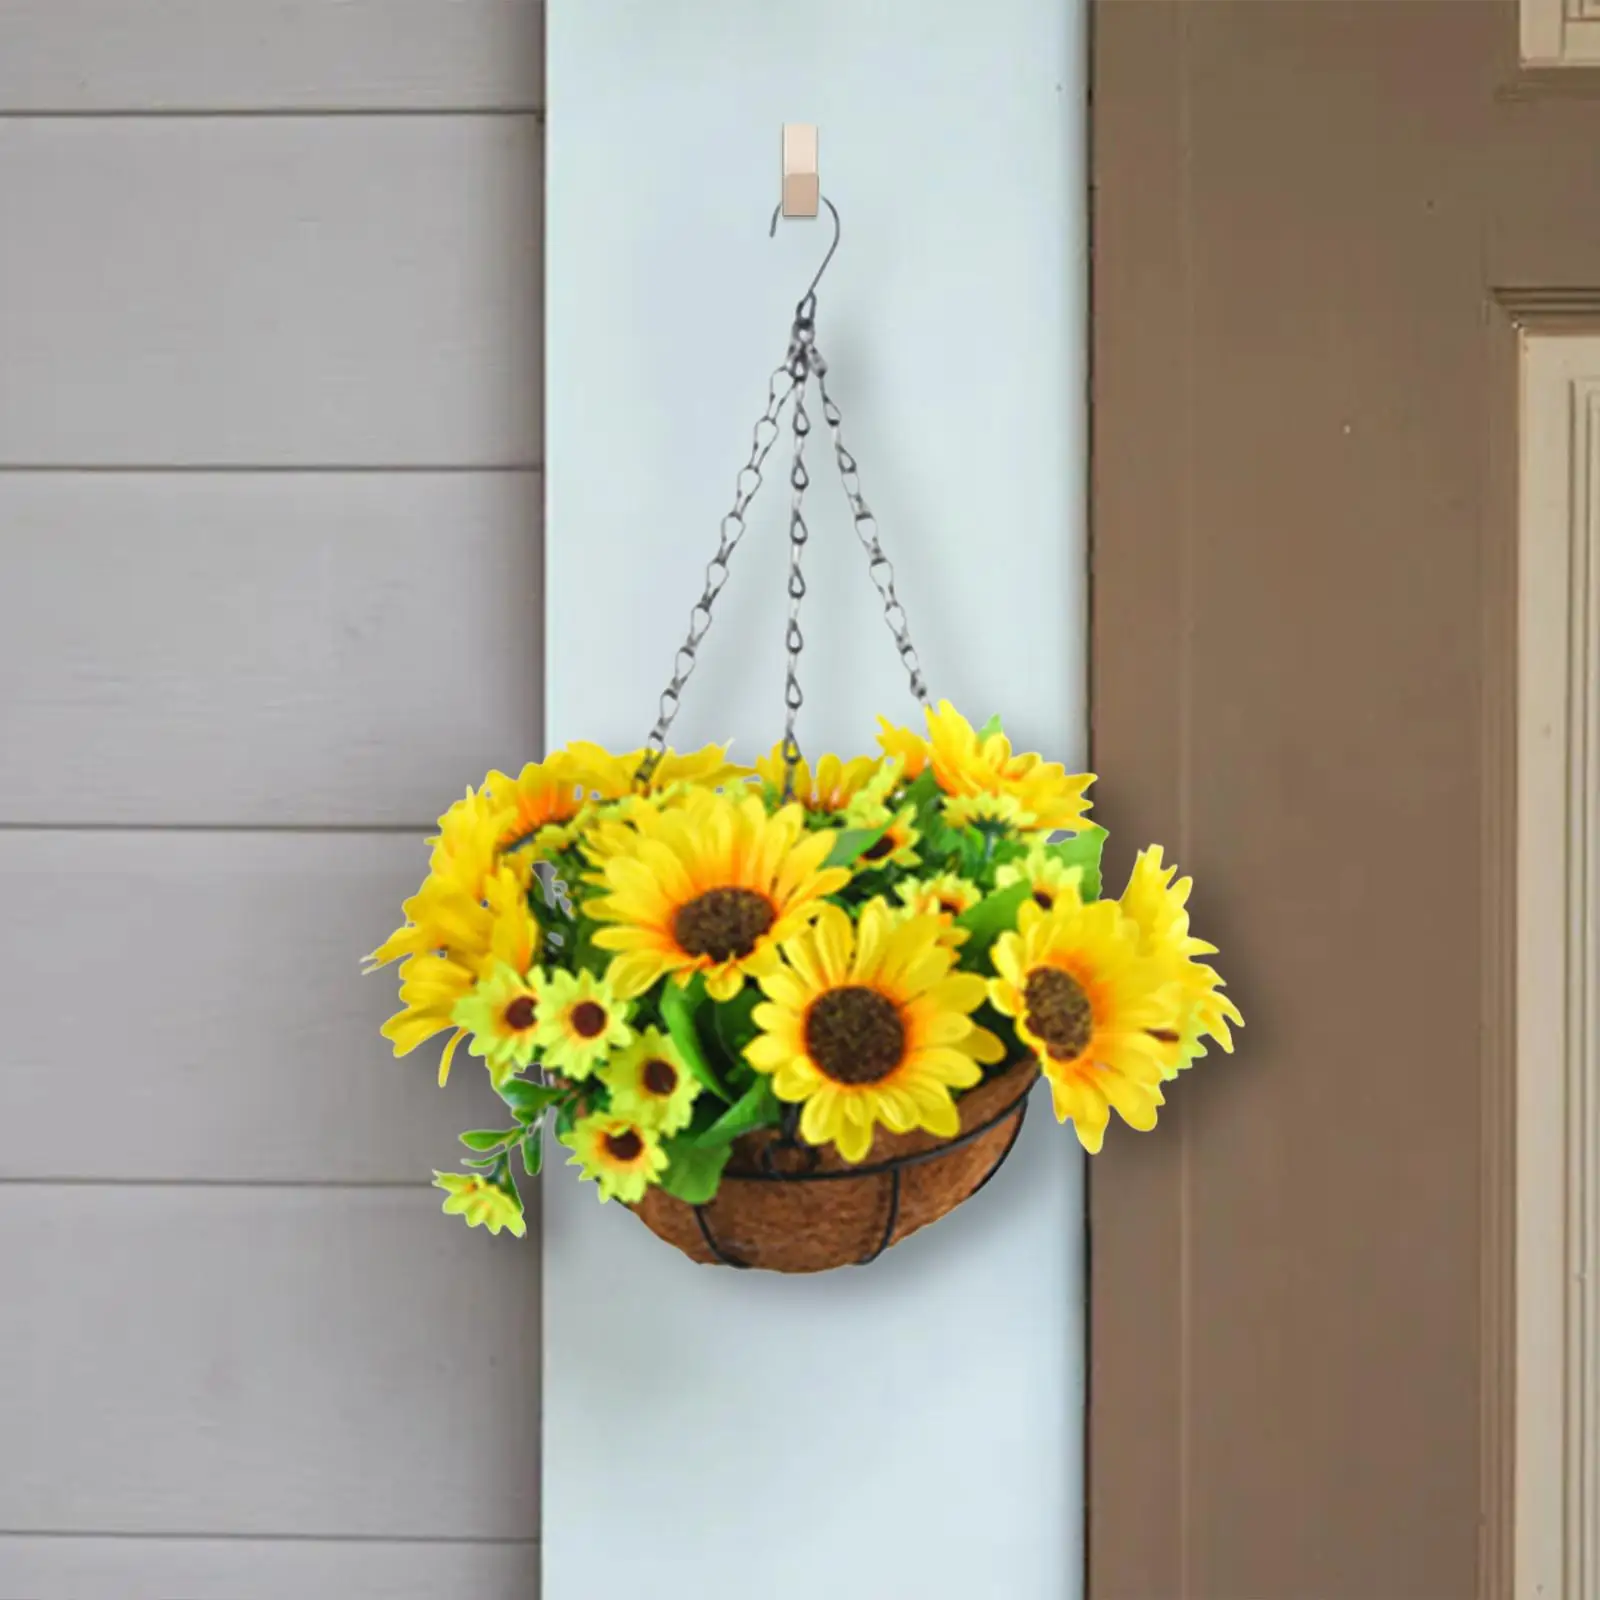 Artificial Hanging Flowers in Basket for Patio Bride Holding Flowers Wedding